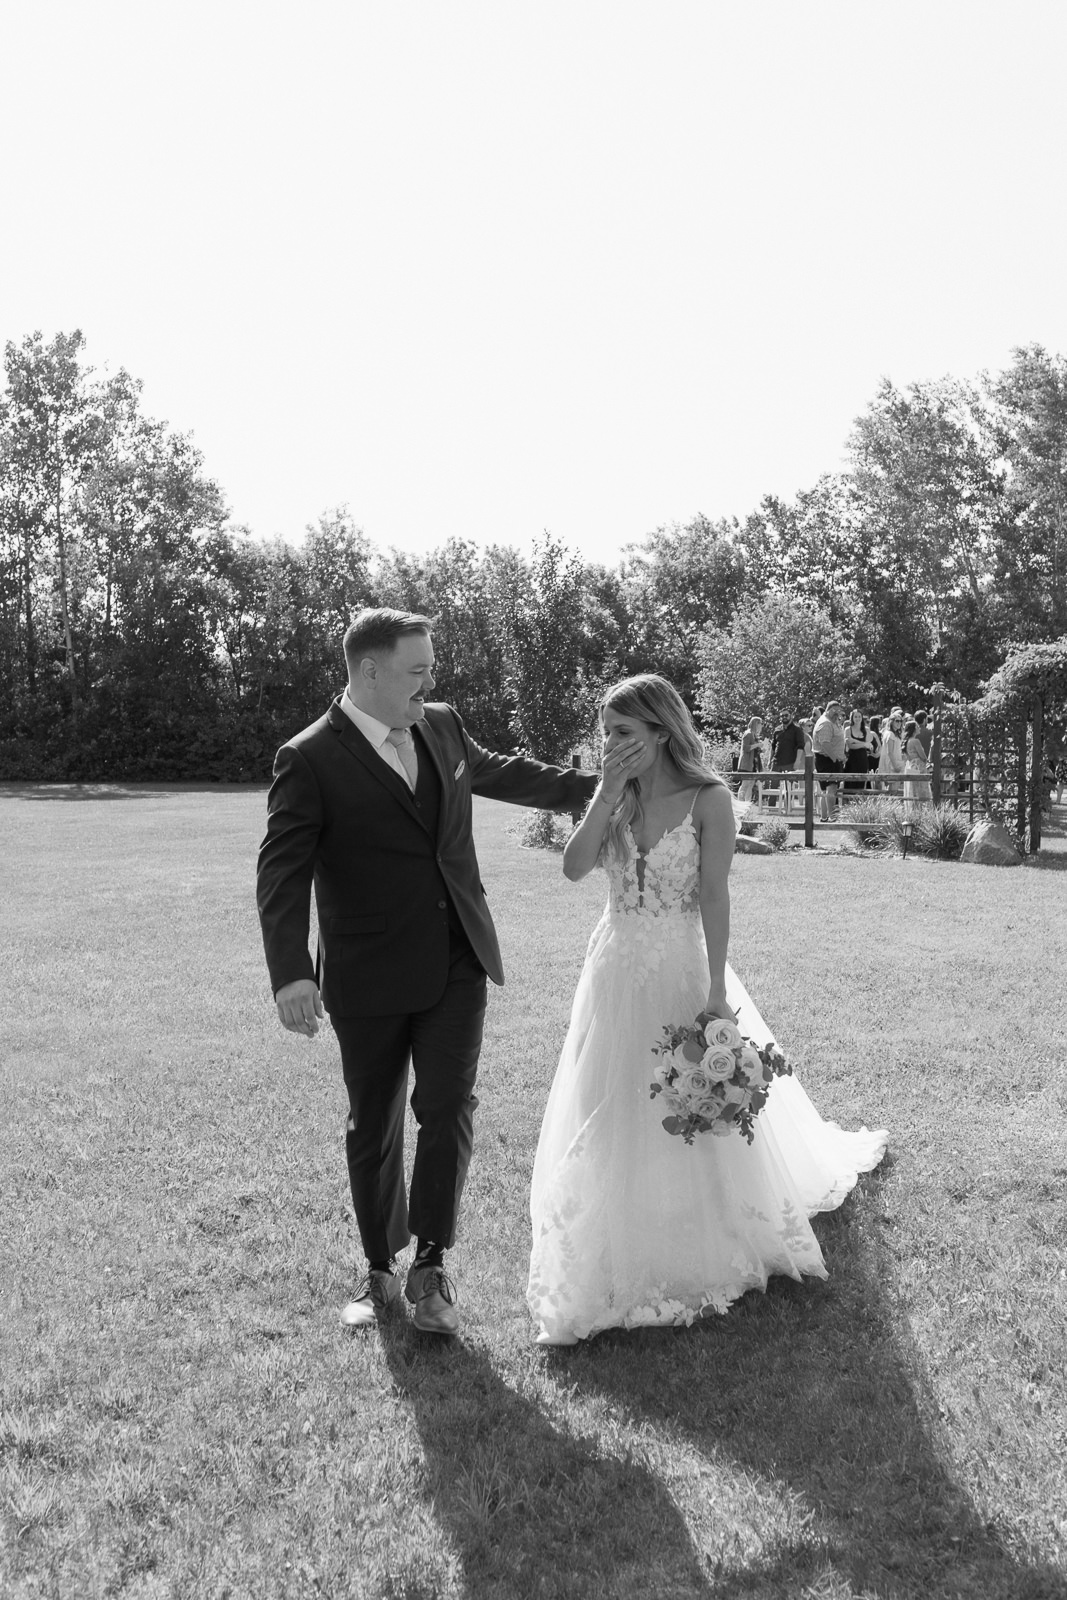 A couple who was married at Rivers Edge Resort in Manitoba.